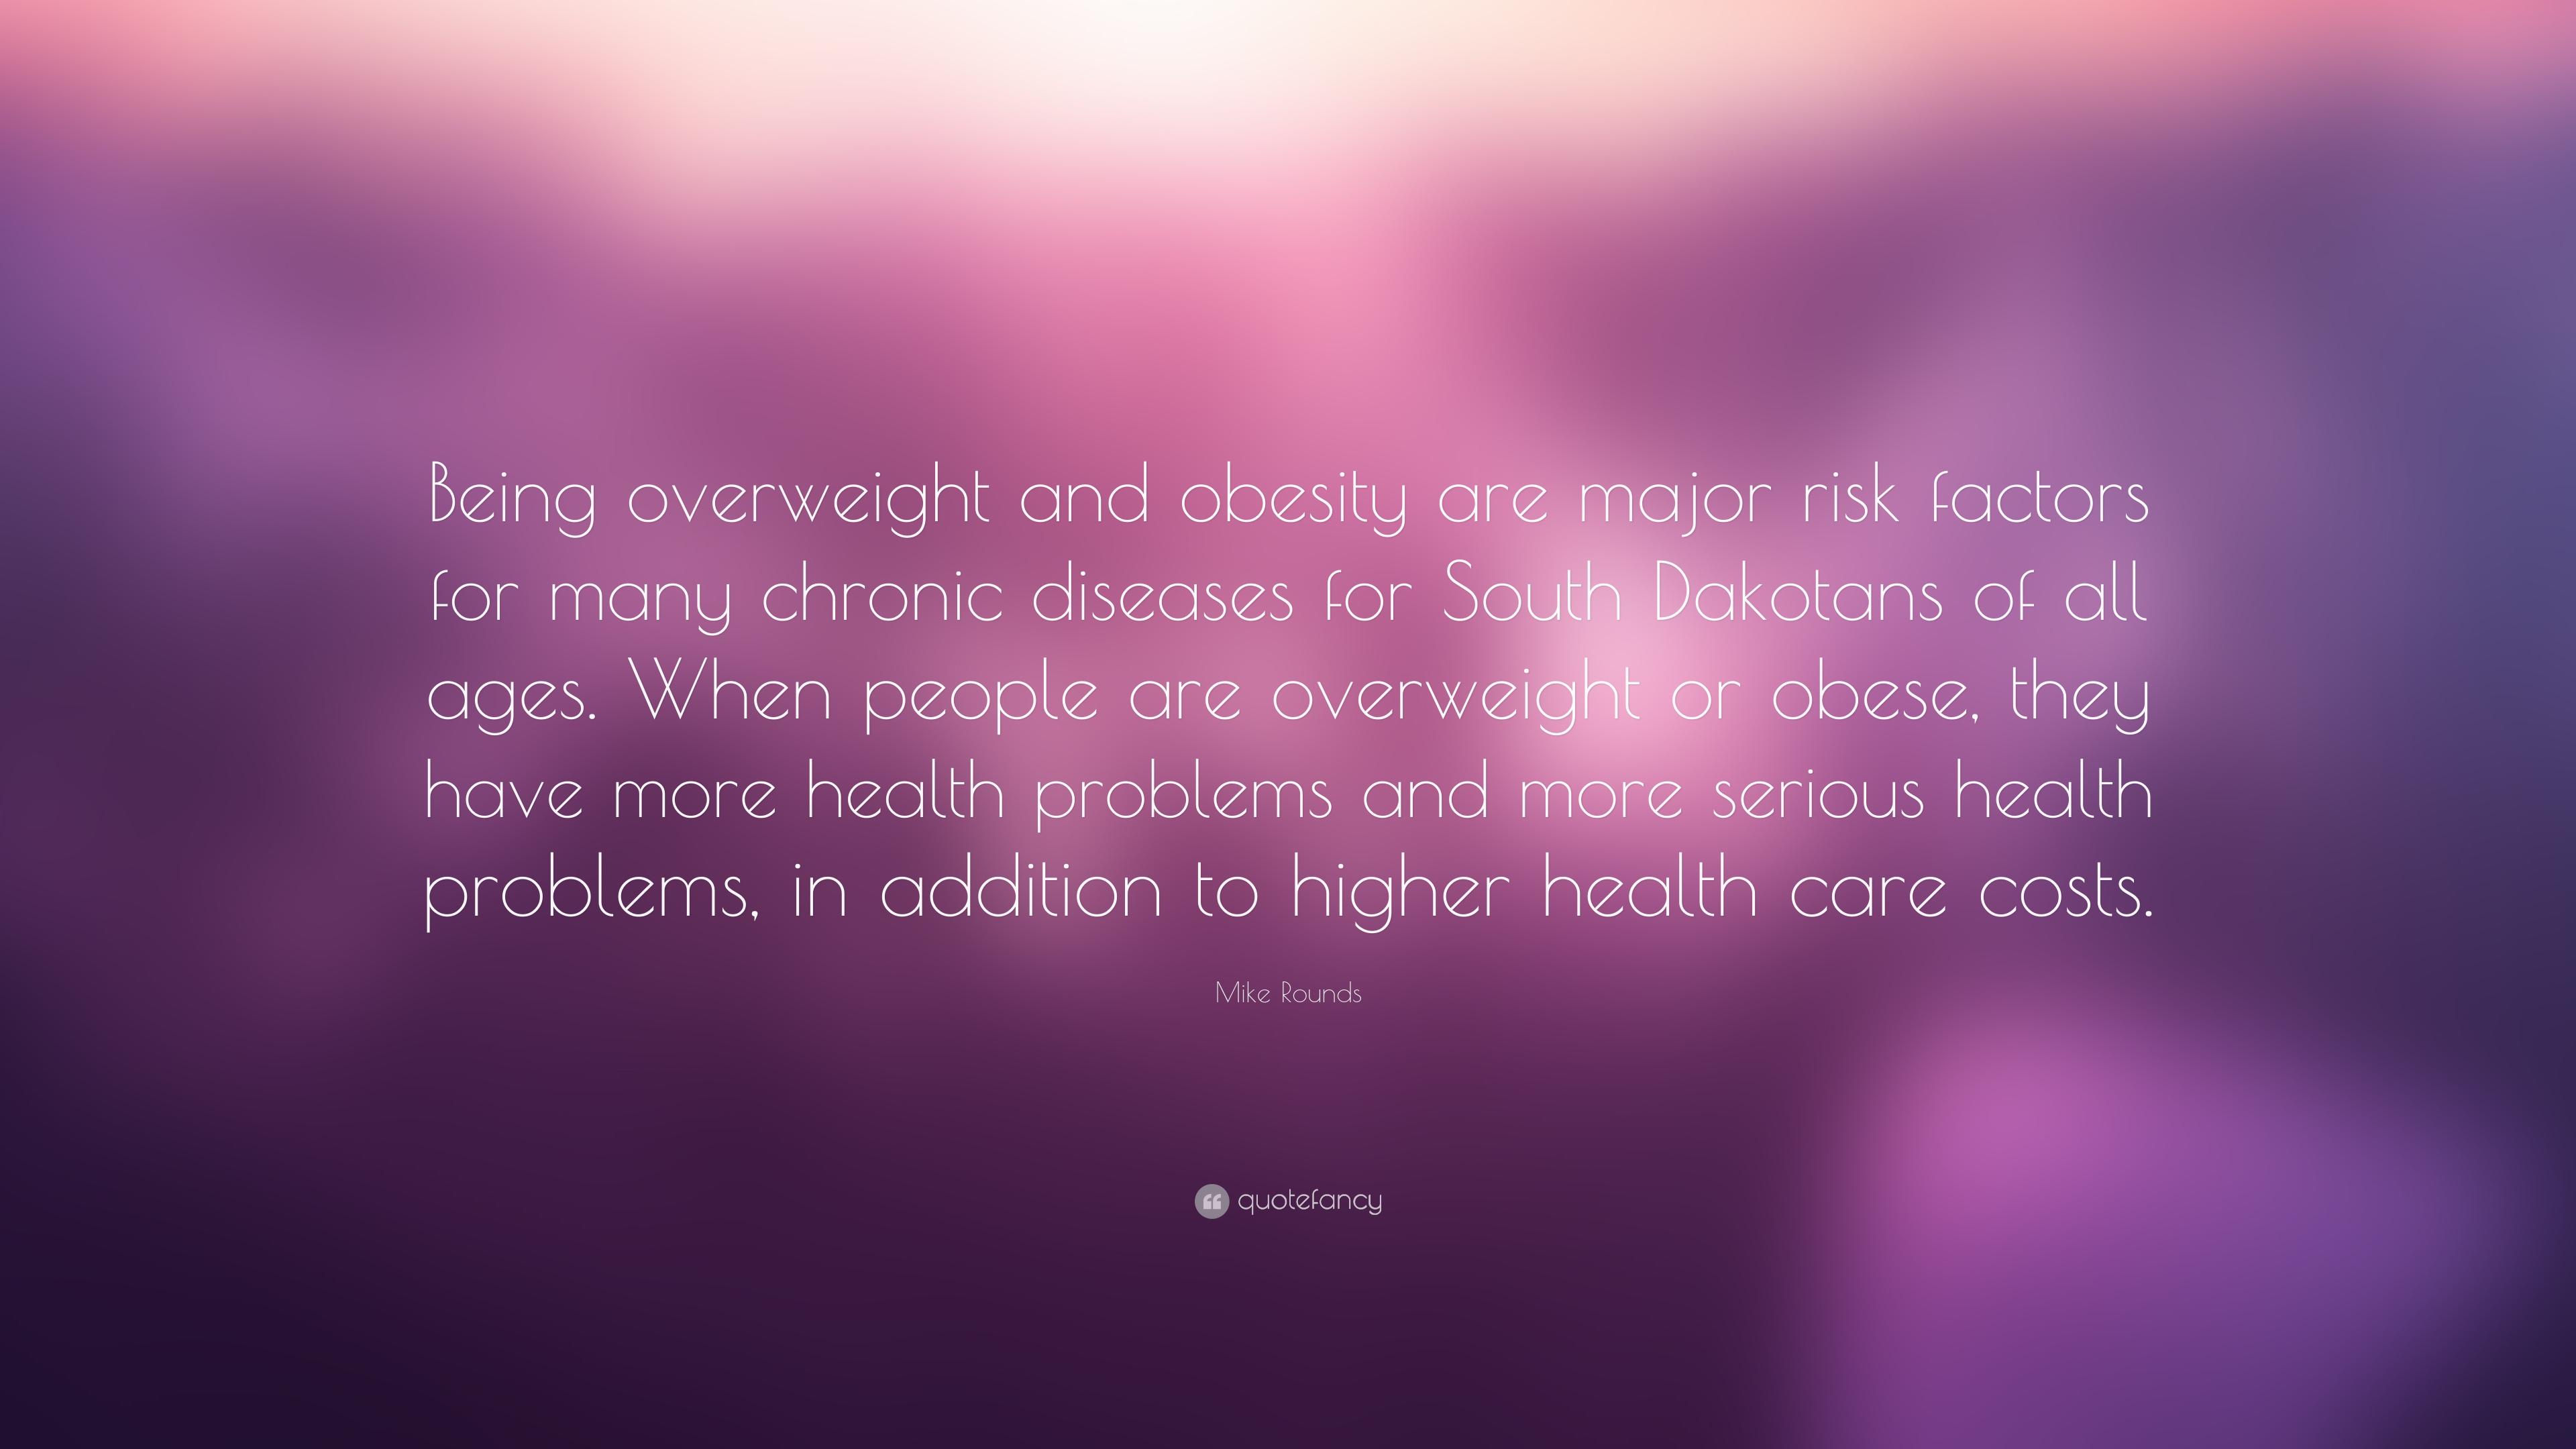 Mike Rounds Quote: “Being overweight and obesity are major